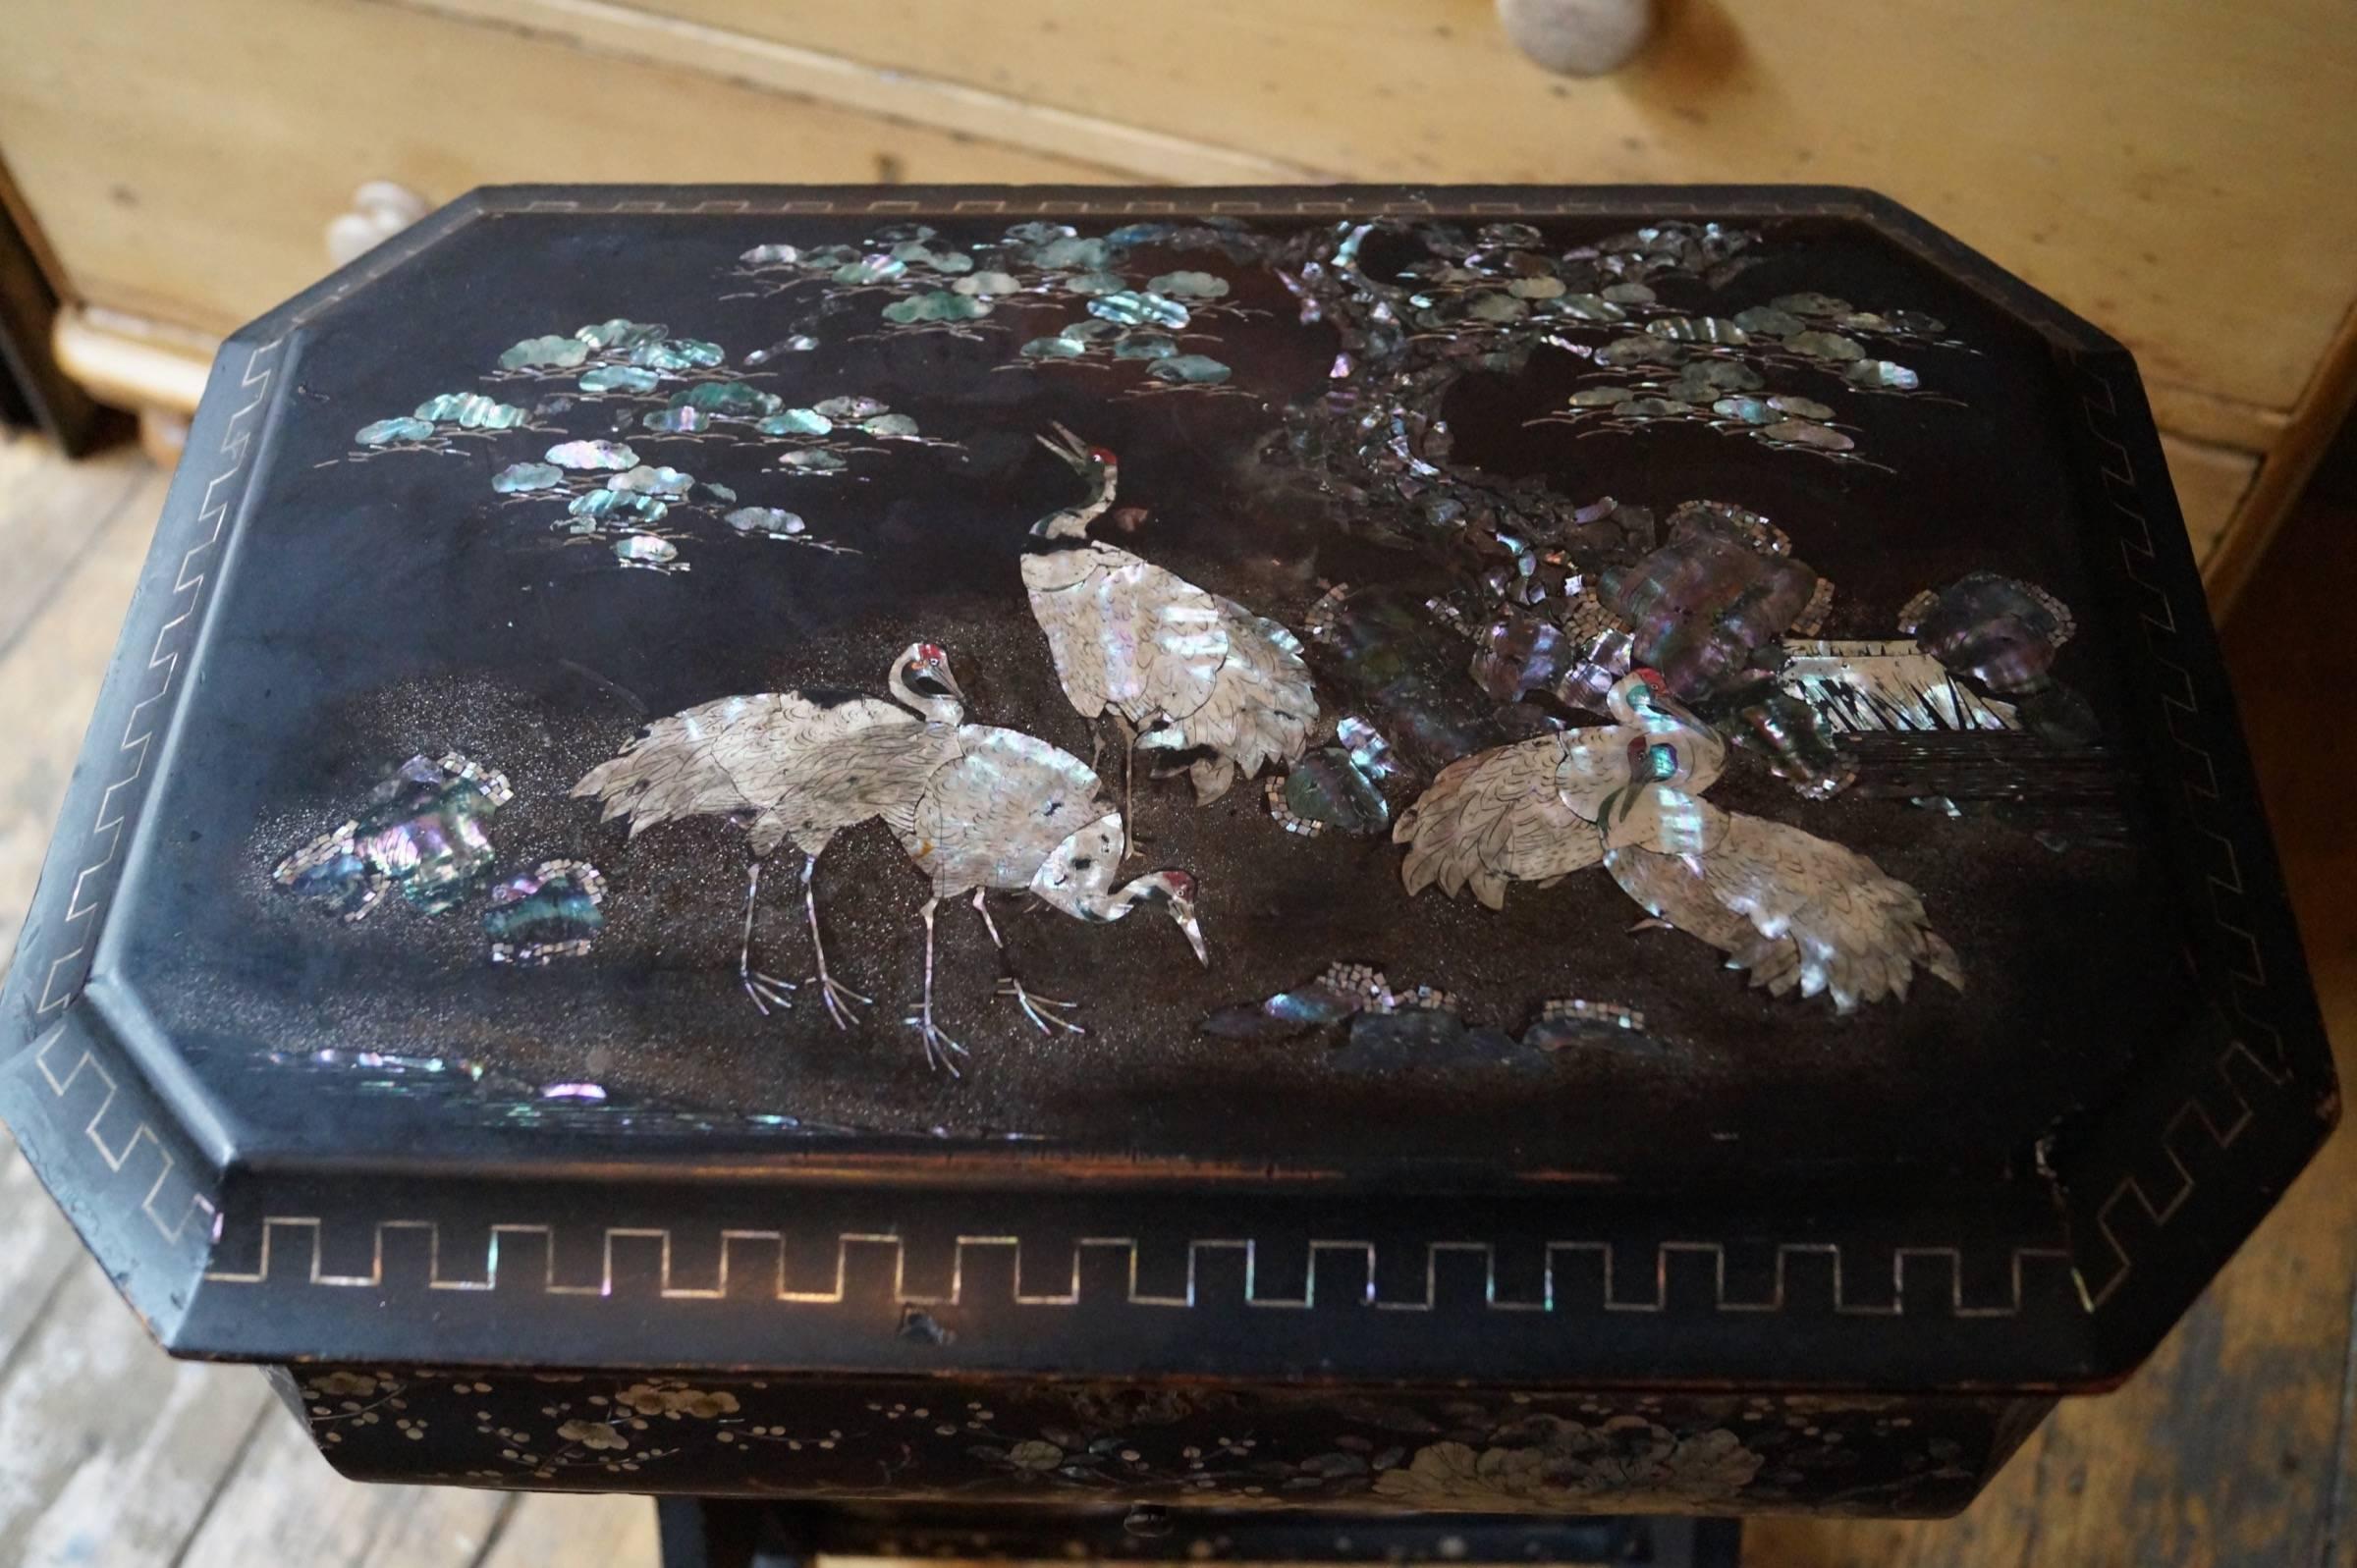 Chinoiserie late 19th century.
Beautifully decorated with mother-of-pearl.
Exclusive and very decorative storage or sewing box.
Also called Lady’s work table.

Measures: HxWxD  78cm x 46cm x 30cm.
 